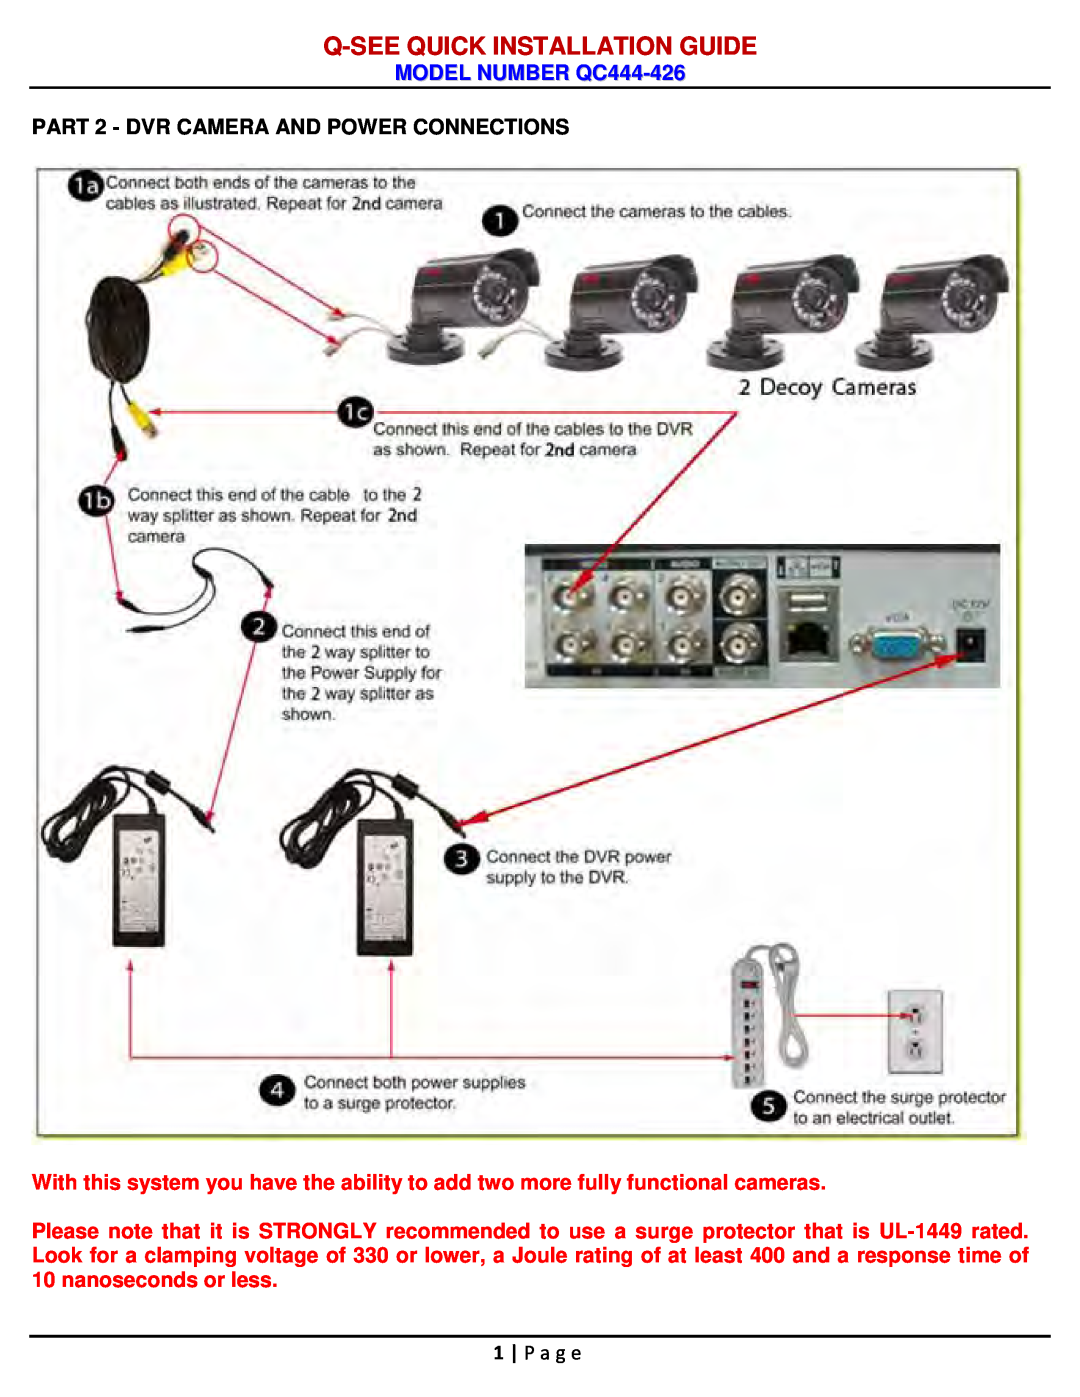 Q-See manual PART 2 - DVR CAMERA AND POWER CONNECTIONS, Q-Seequick Installation Guide, MODEL NUMBER QC444-426 